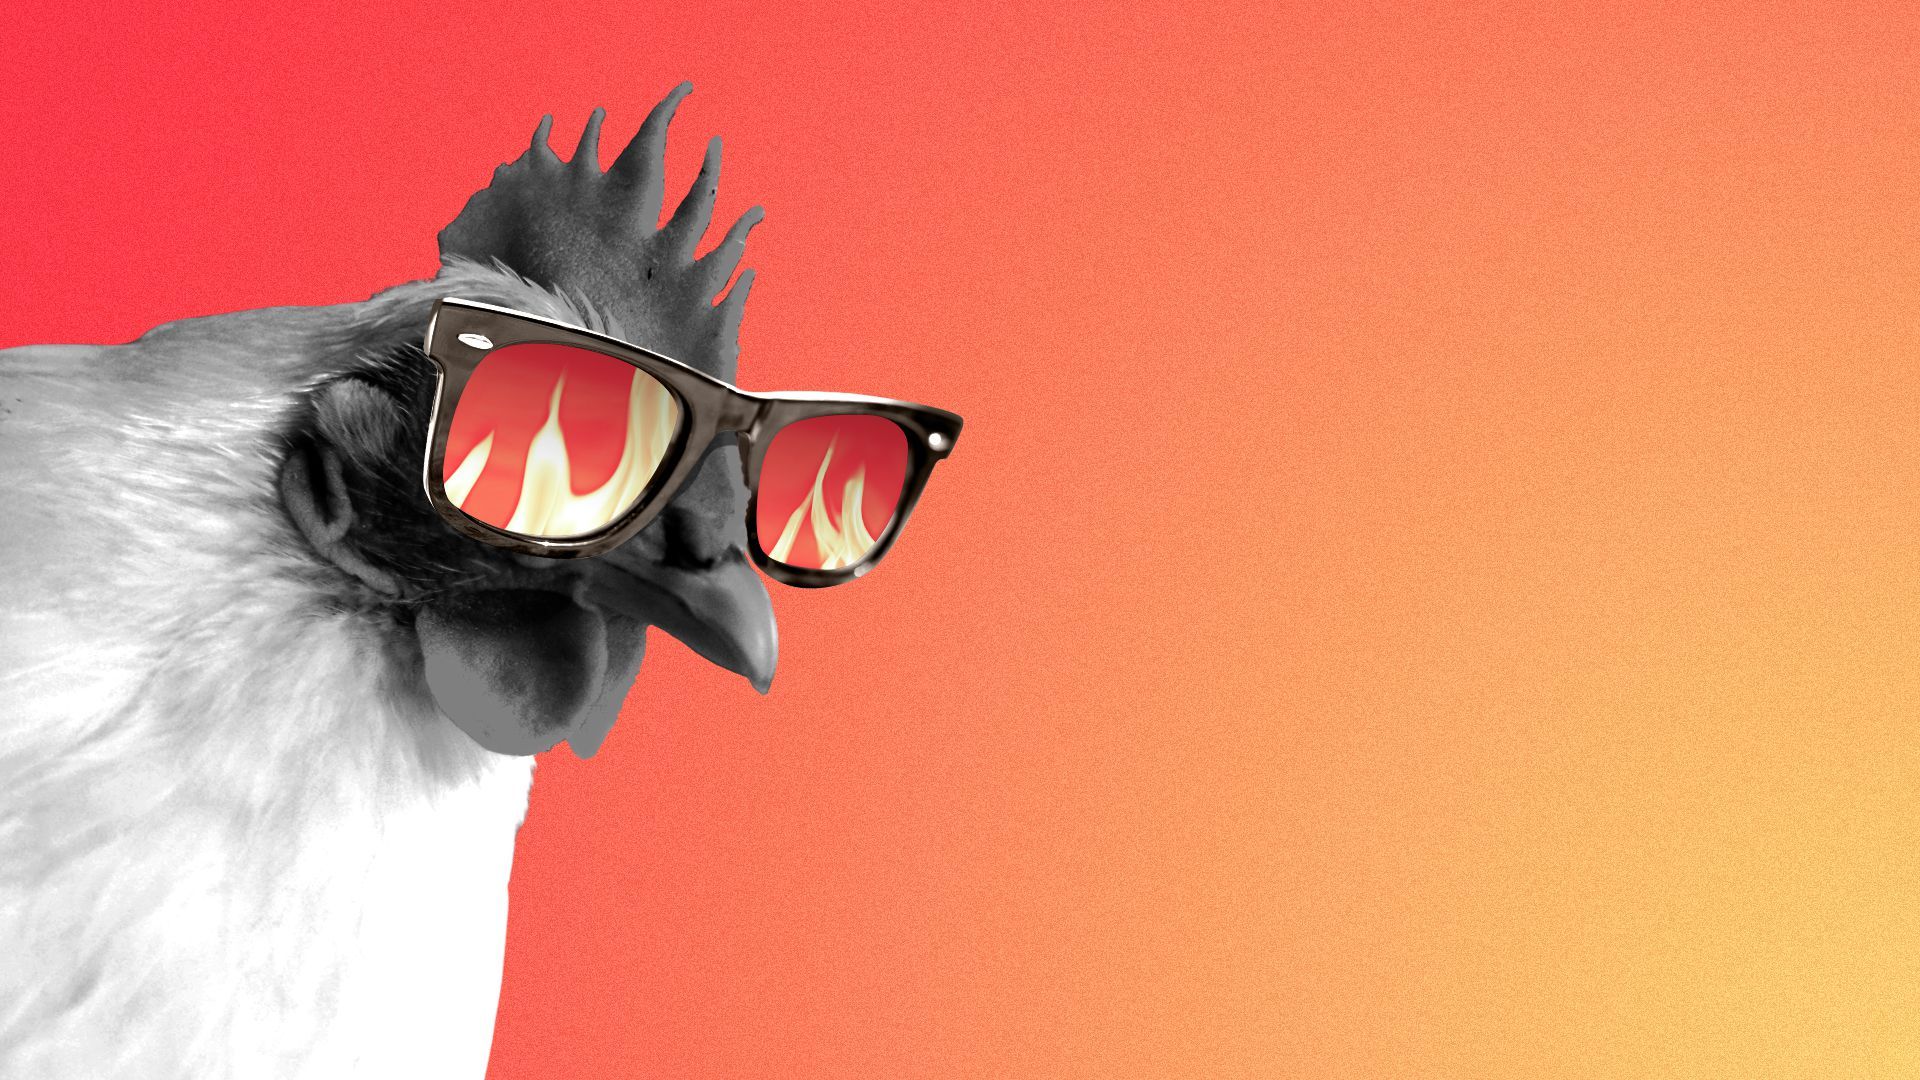 Illustration of a chicken wearing sunglasses with fire reflected in the lenses. 